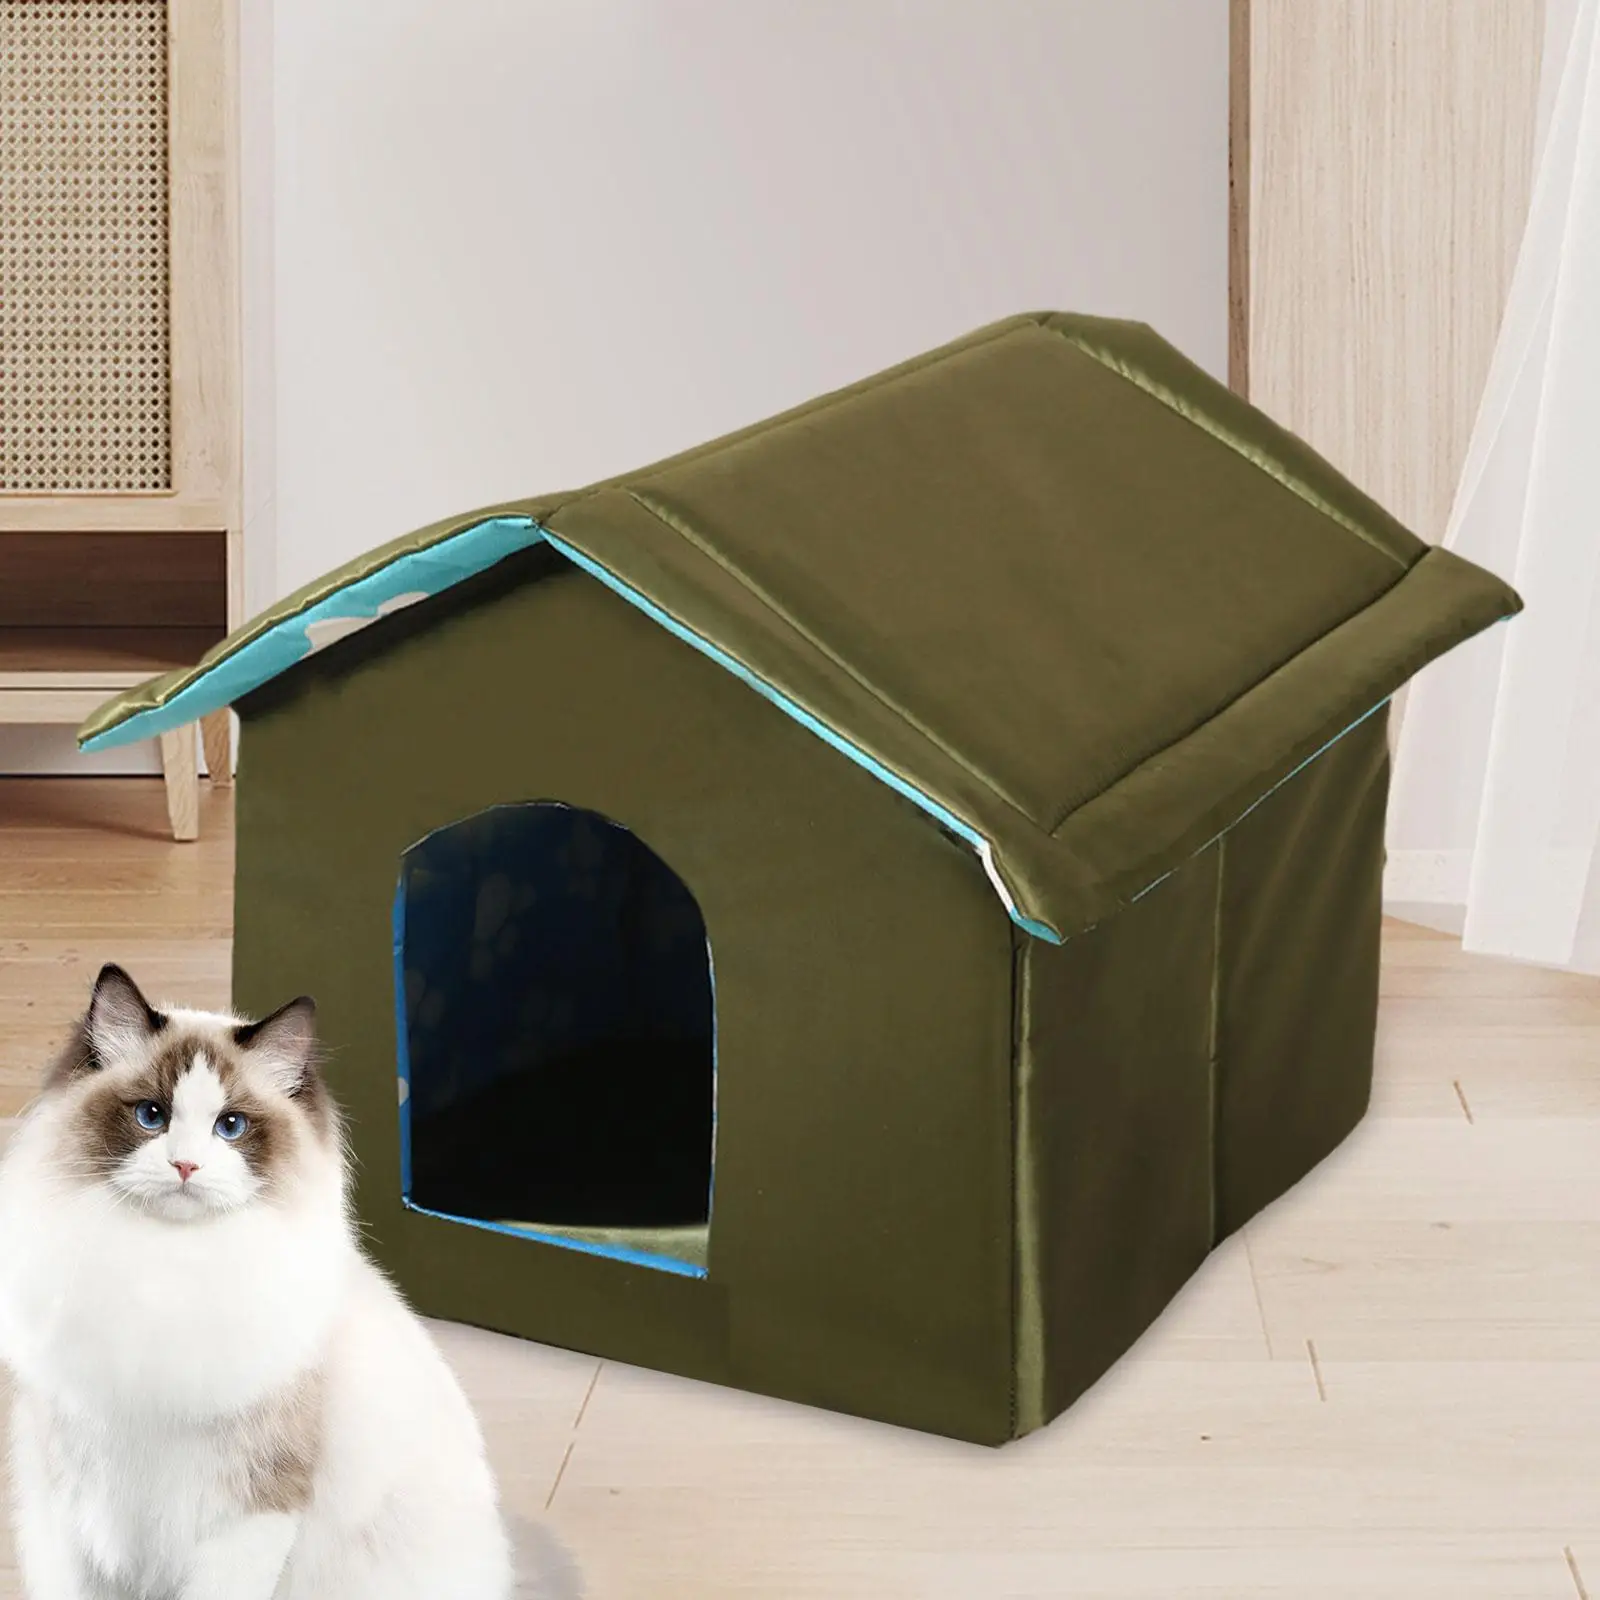 Stray Cats Shelter Weatherproof Pet Supplies Rainproof Tent Cave Bed Cat Bed Sleeping Pet House Outdoor Feral Cats Warm House